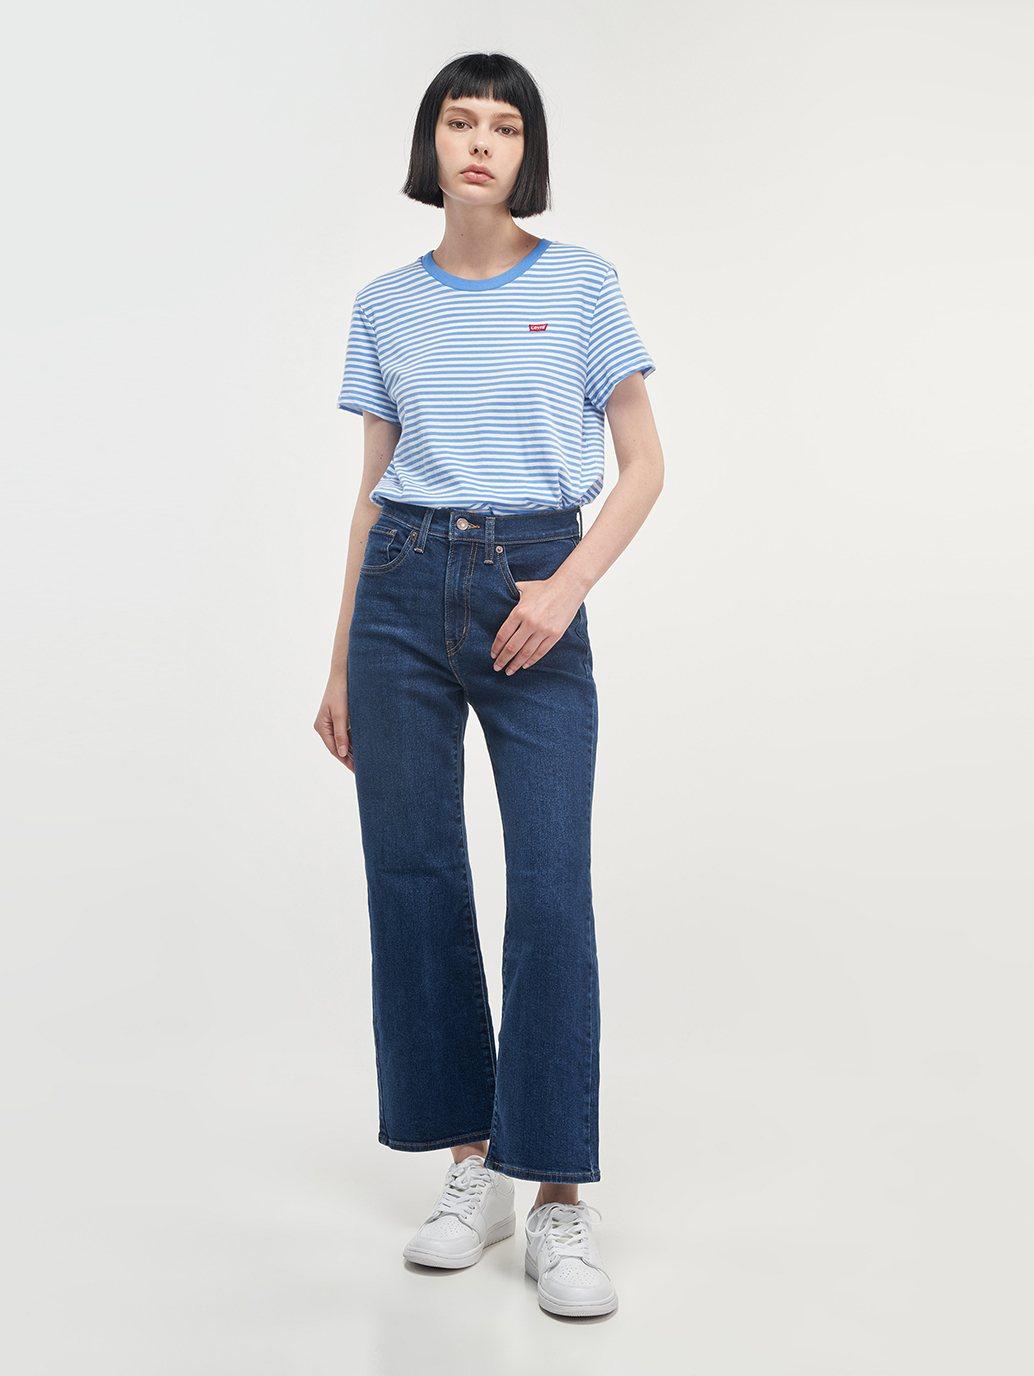 levis malaysia womens high waisted cropped flare jeans A09670004 13 Details